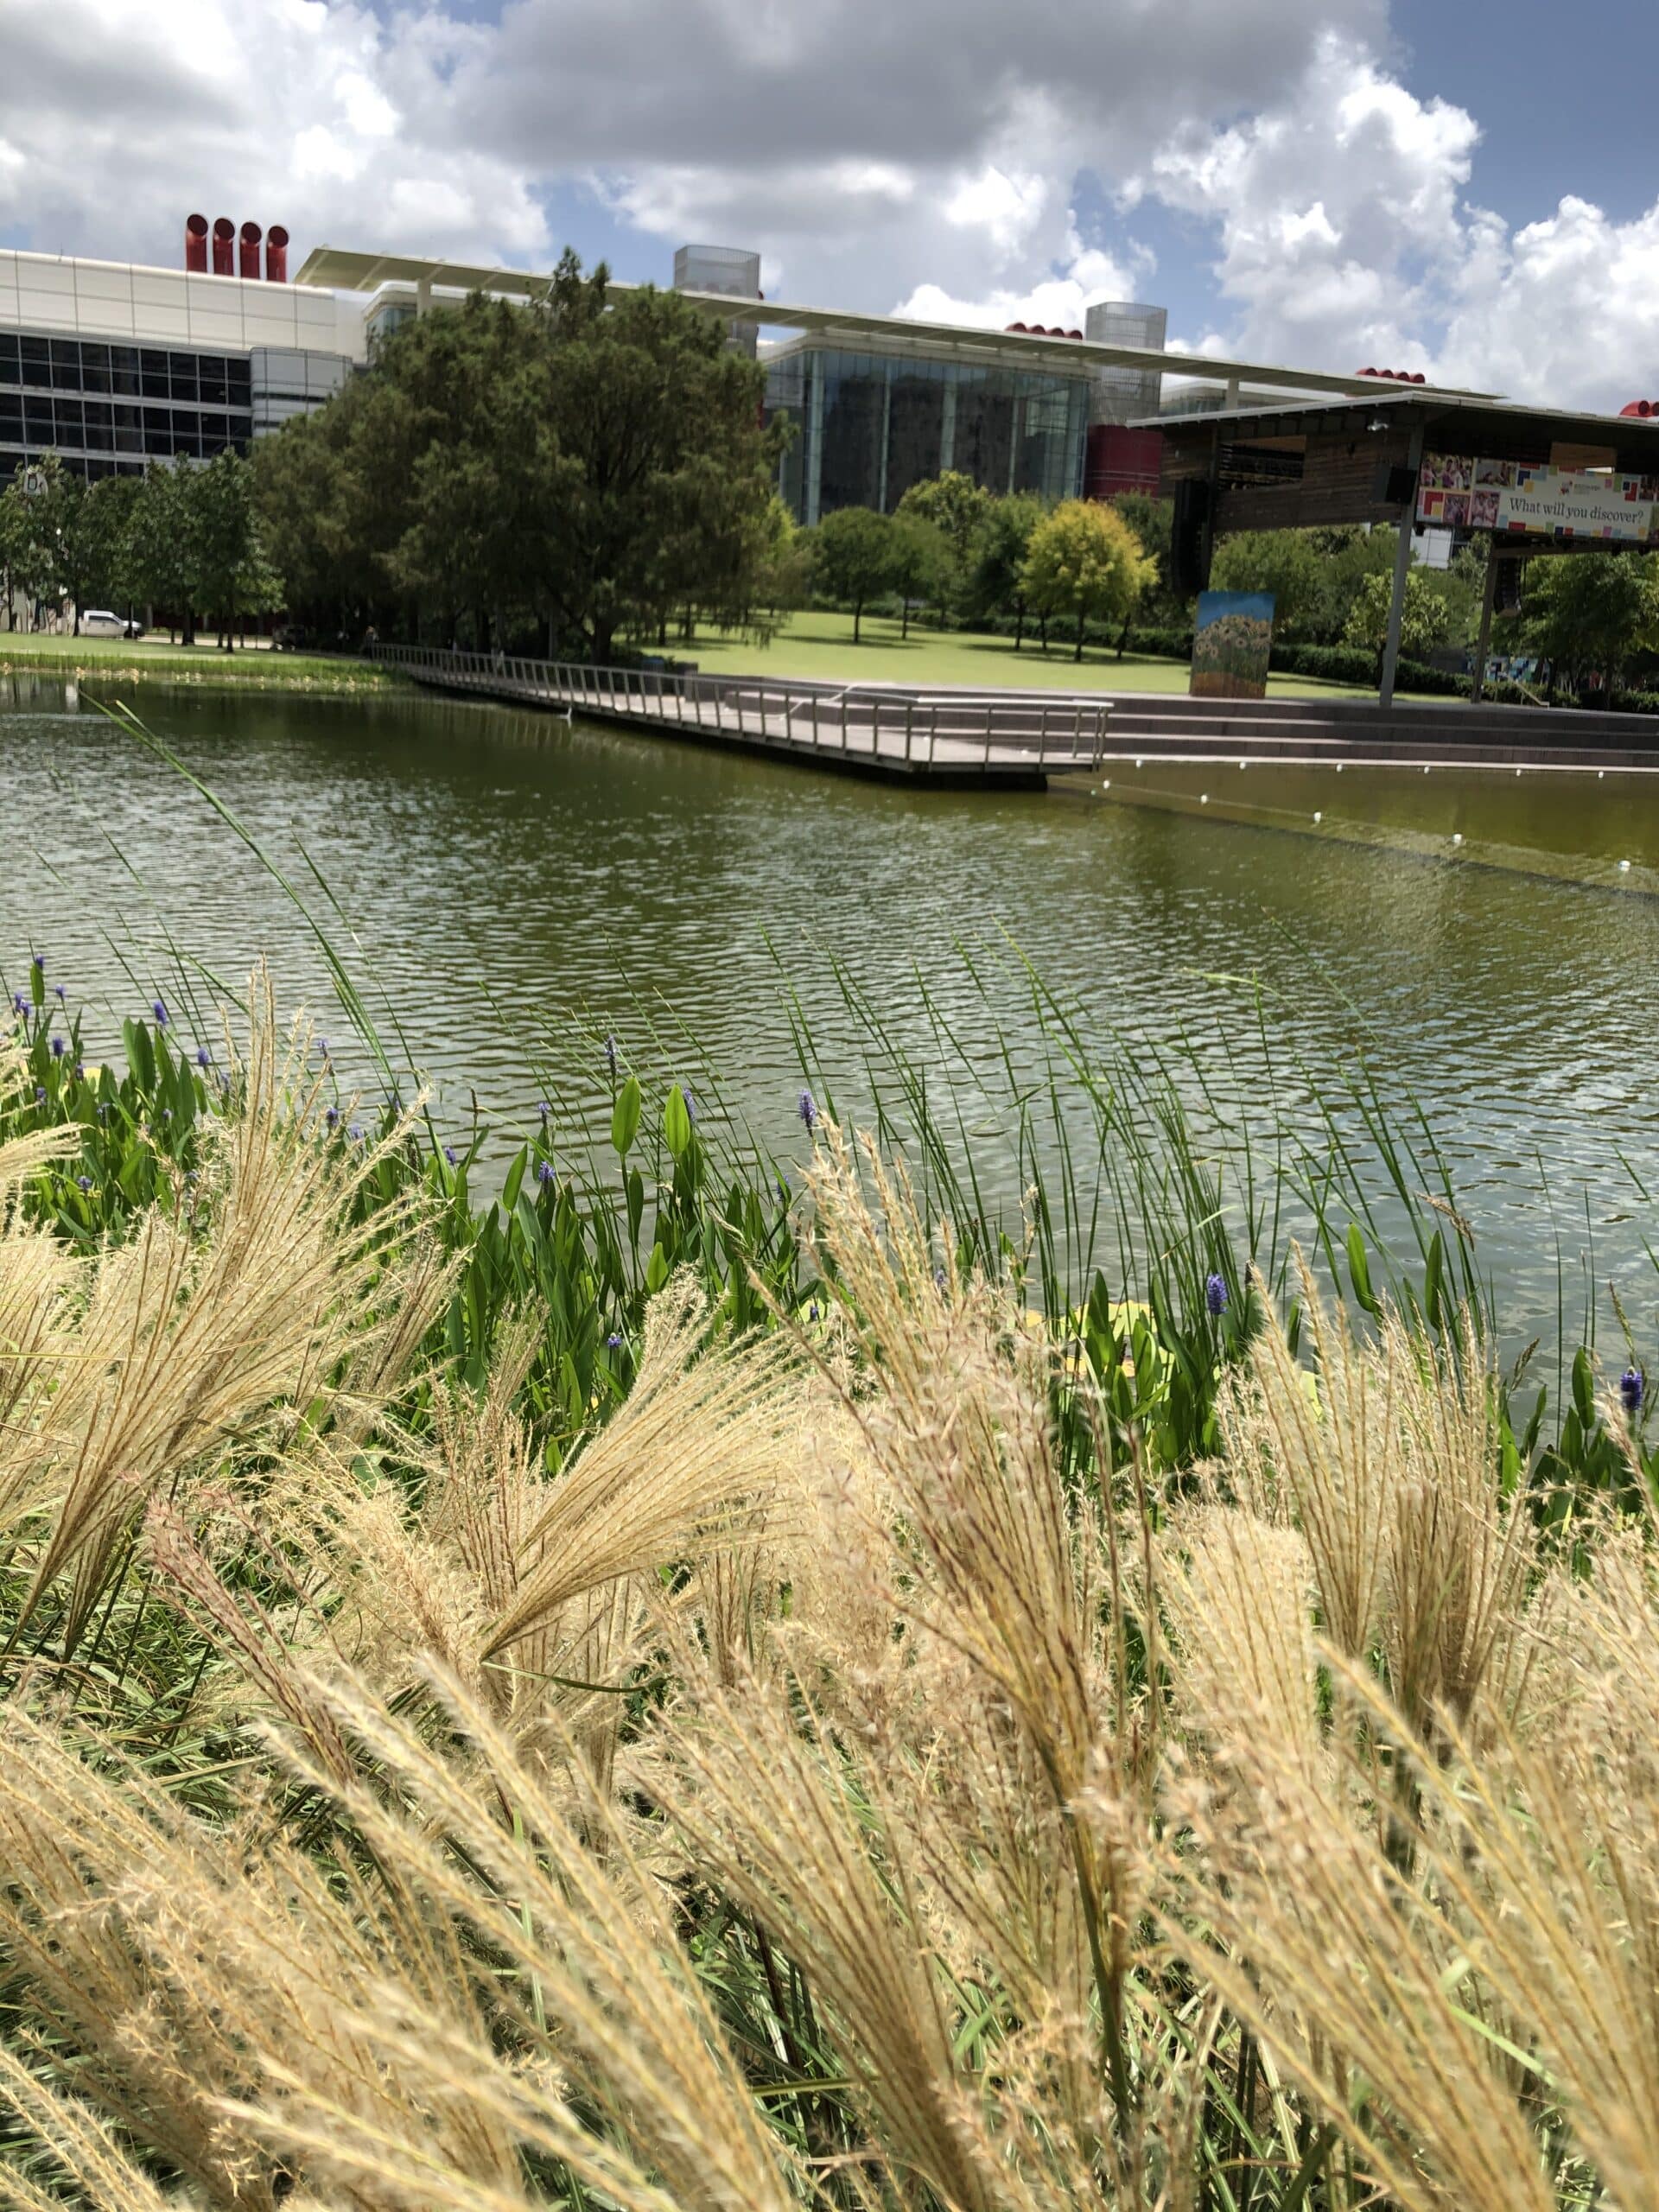 A beautiful peaceful day at Kinder Lake in Discovery Green